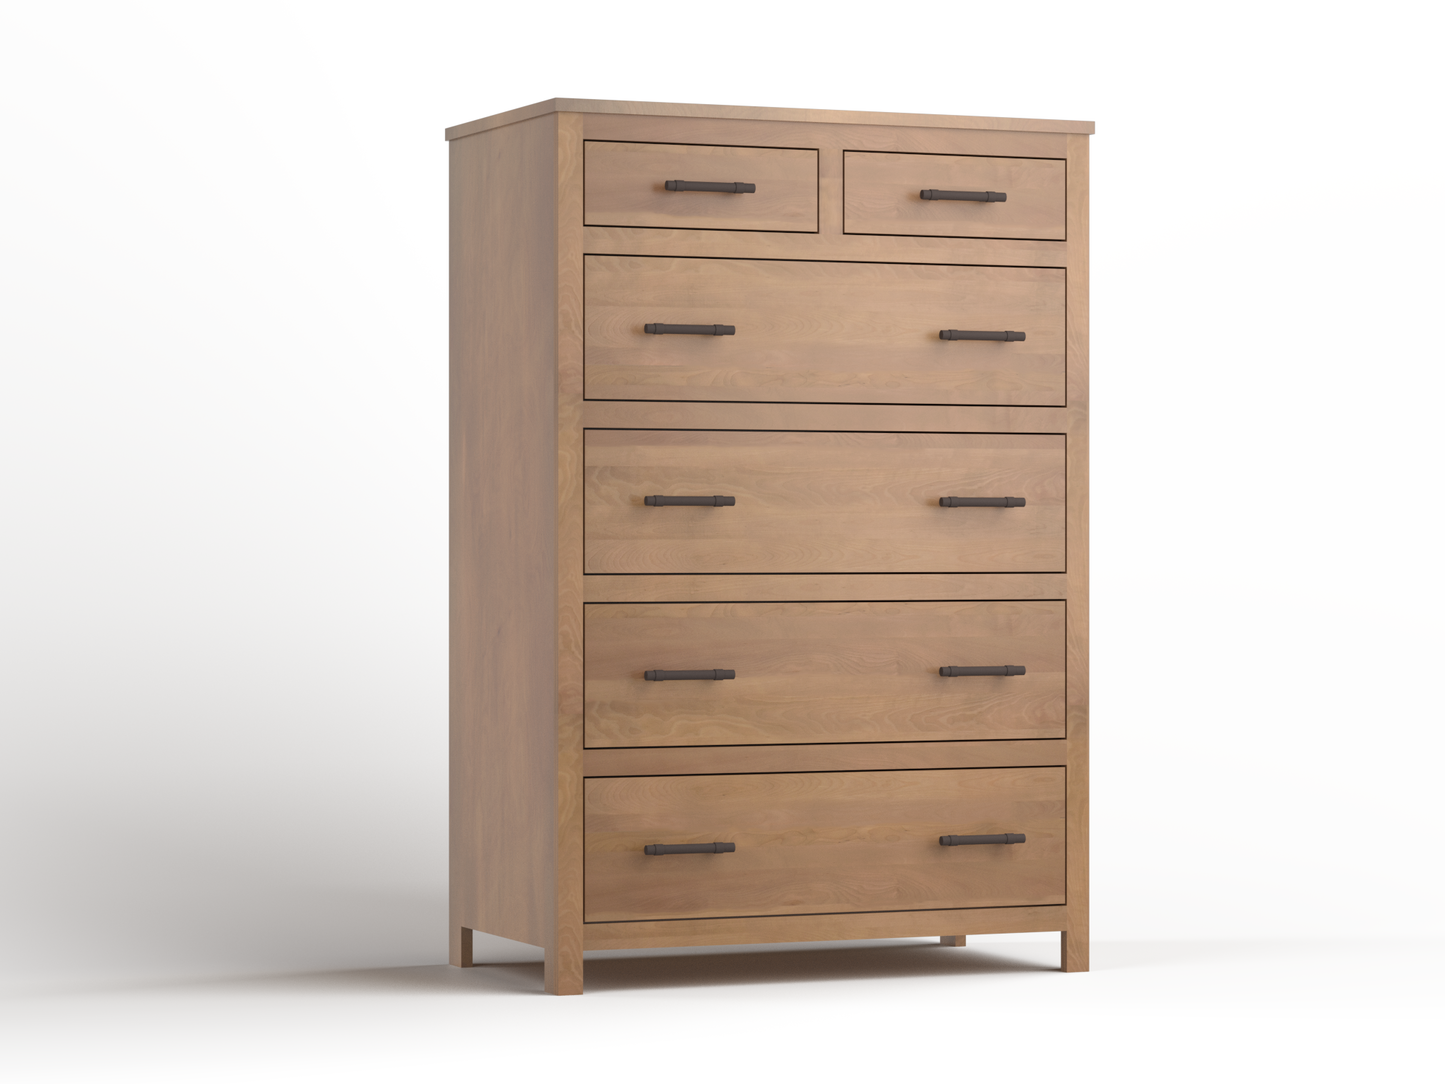 Acadia Tremont Chest with Split Top Drawer is built in birch with a sandstone finish. Features four standard drawers and two small drawers on the top row.